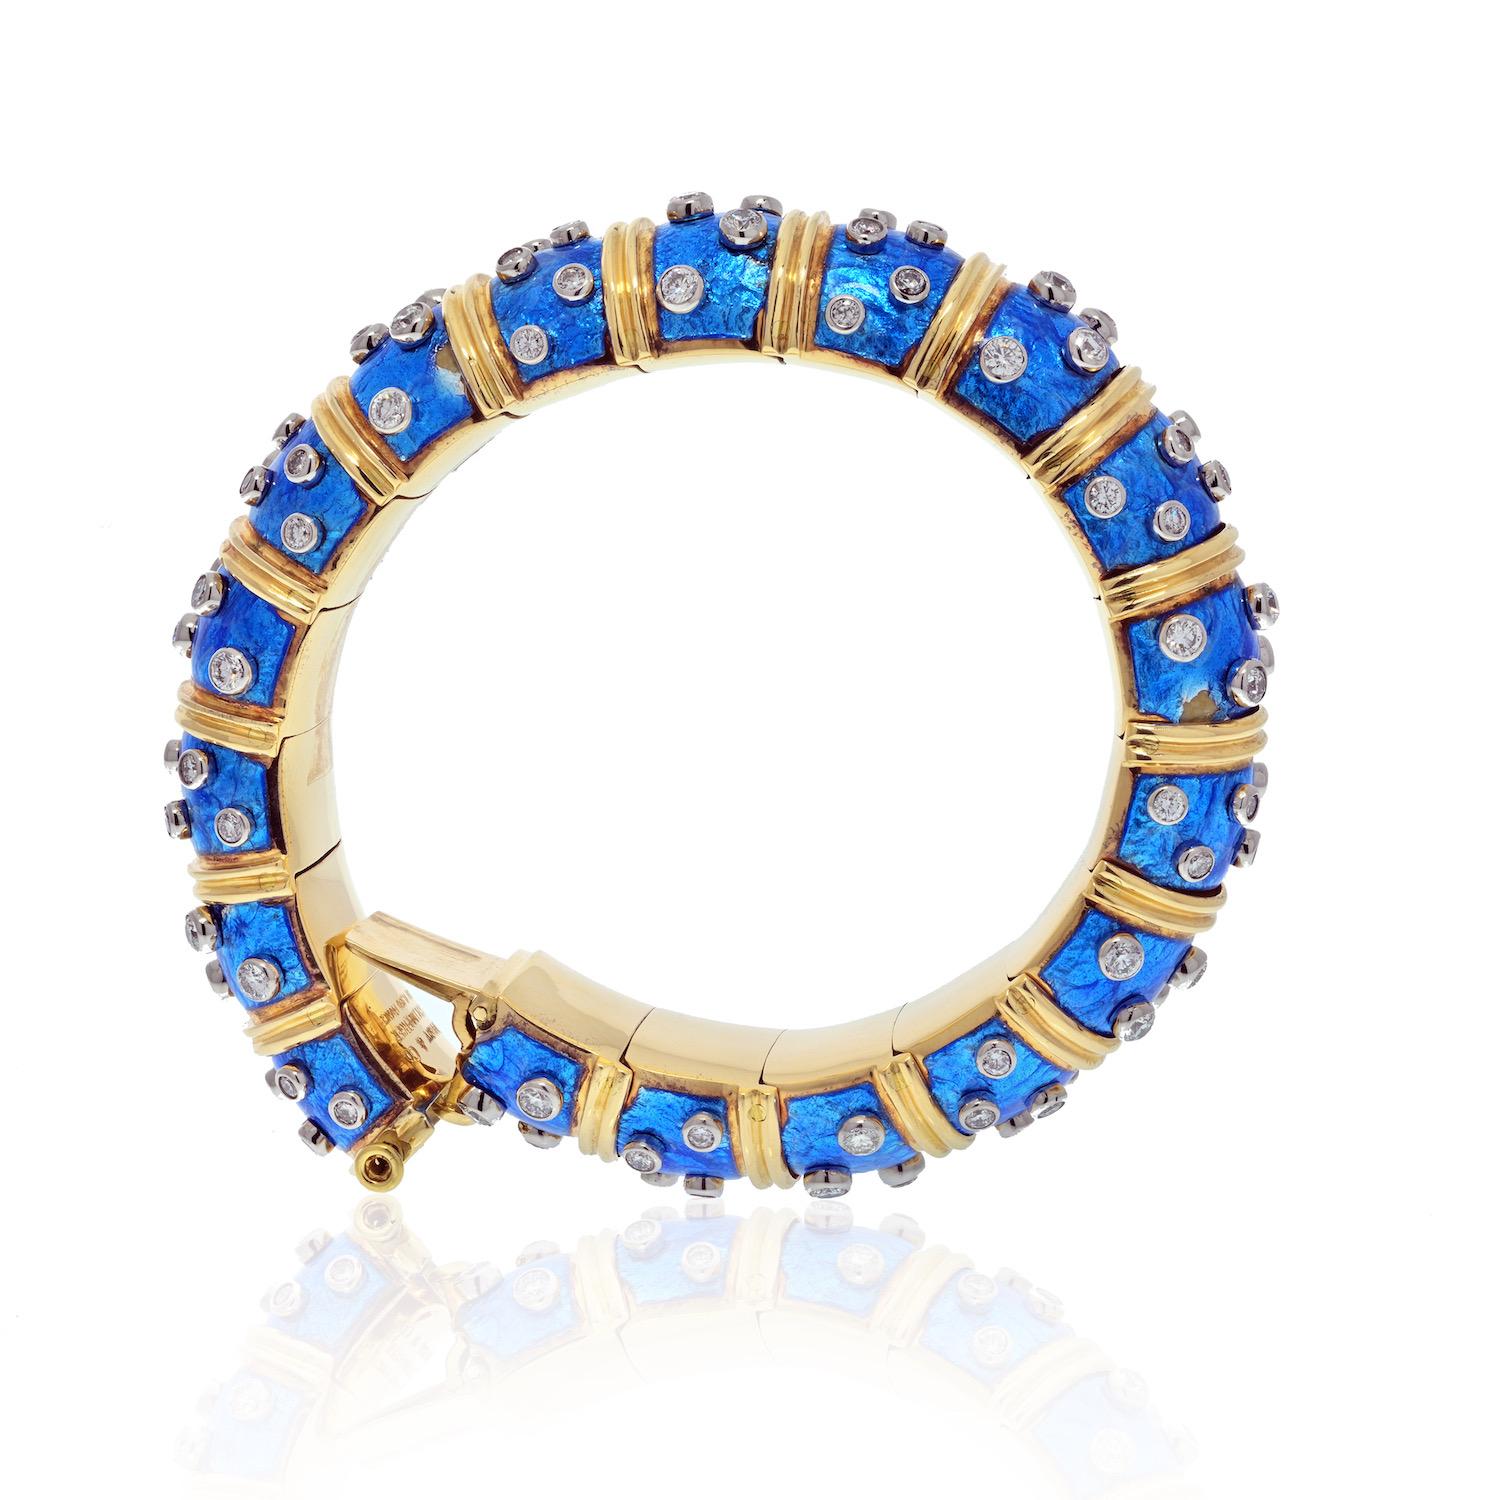 Tiffany & Co. Schlumberger Platinum & 18K Yellow Gold Blue Enamel Diamond Bangle Bracelet.
18 kt., the articulated link bombe bangle applied with blue enamel, alternately spaced by ribbed gold bands, studded with 108 collet-set round diamonds